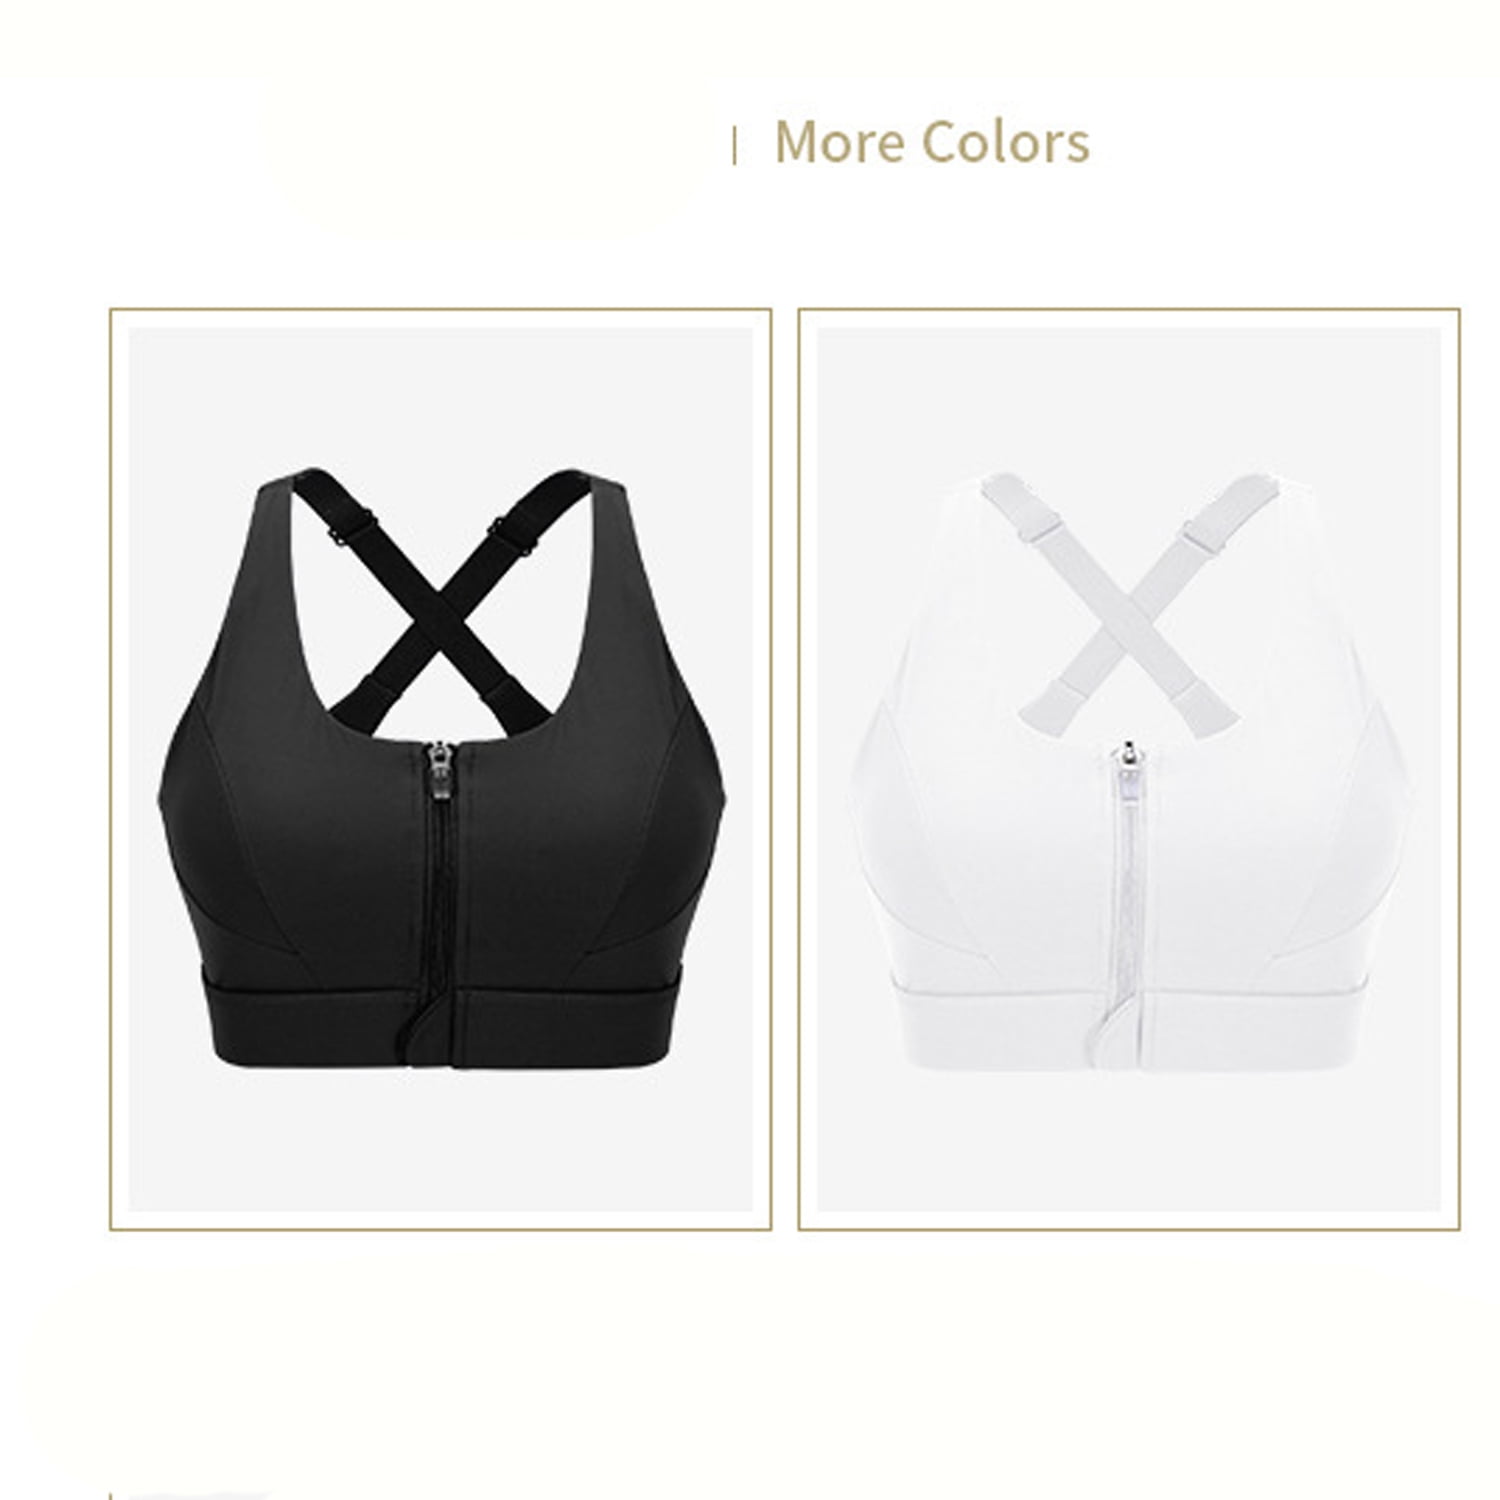 Never Pay Full Price for Xersion Train High Support Sports Bra